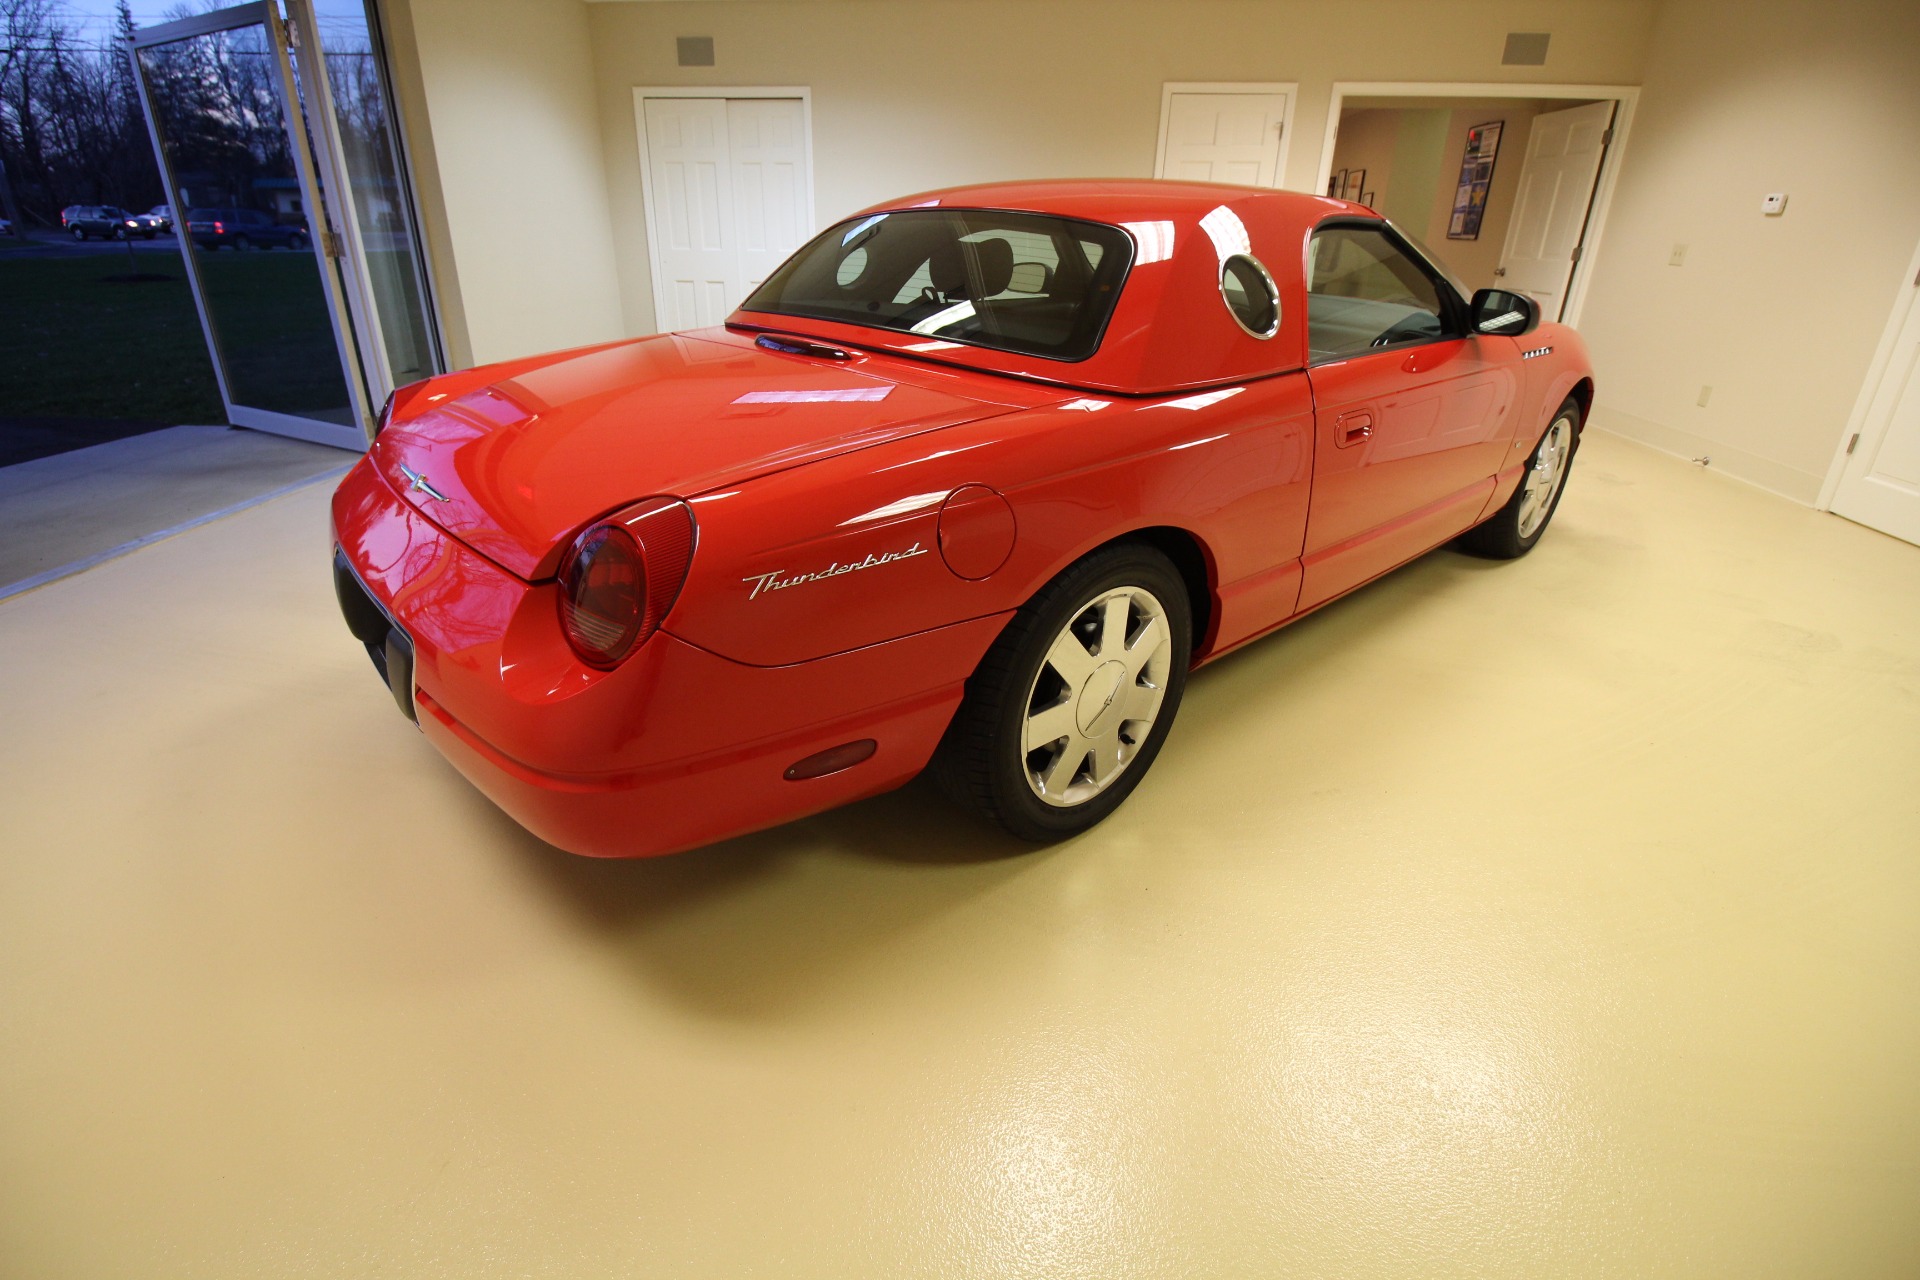 Used 2003 Torch Red with Torch Red Hard Top Ford Thunderbird Premium with removable top | Albany, NY